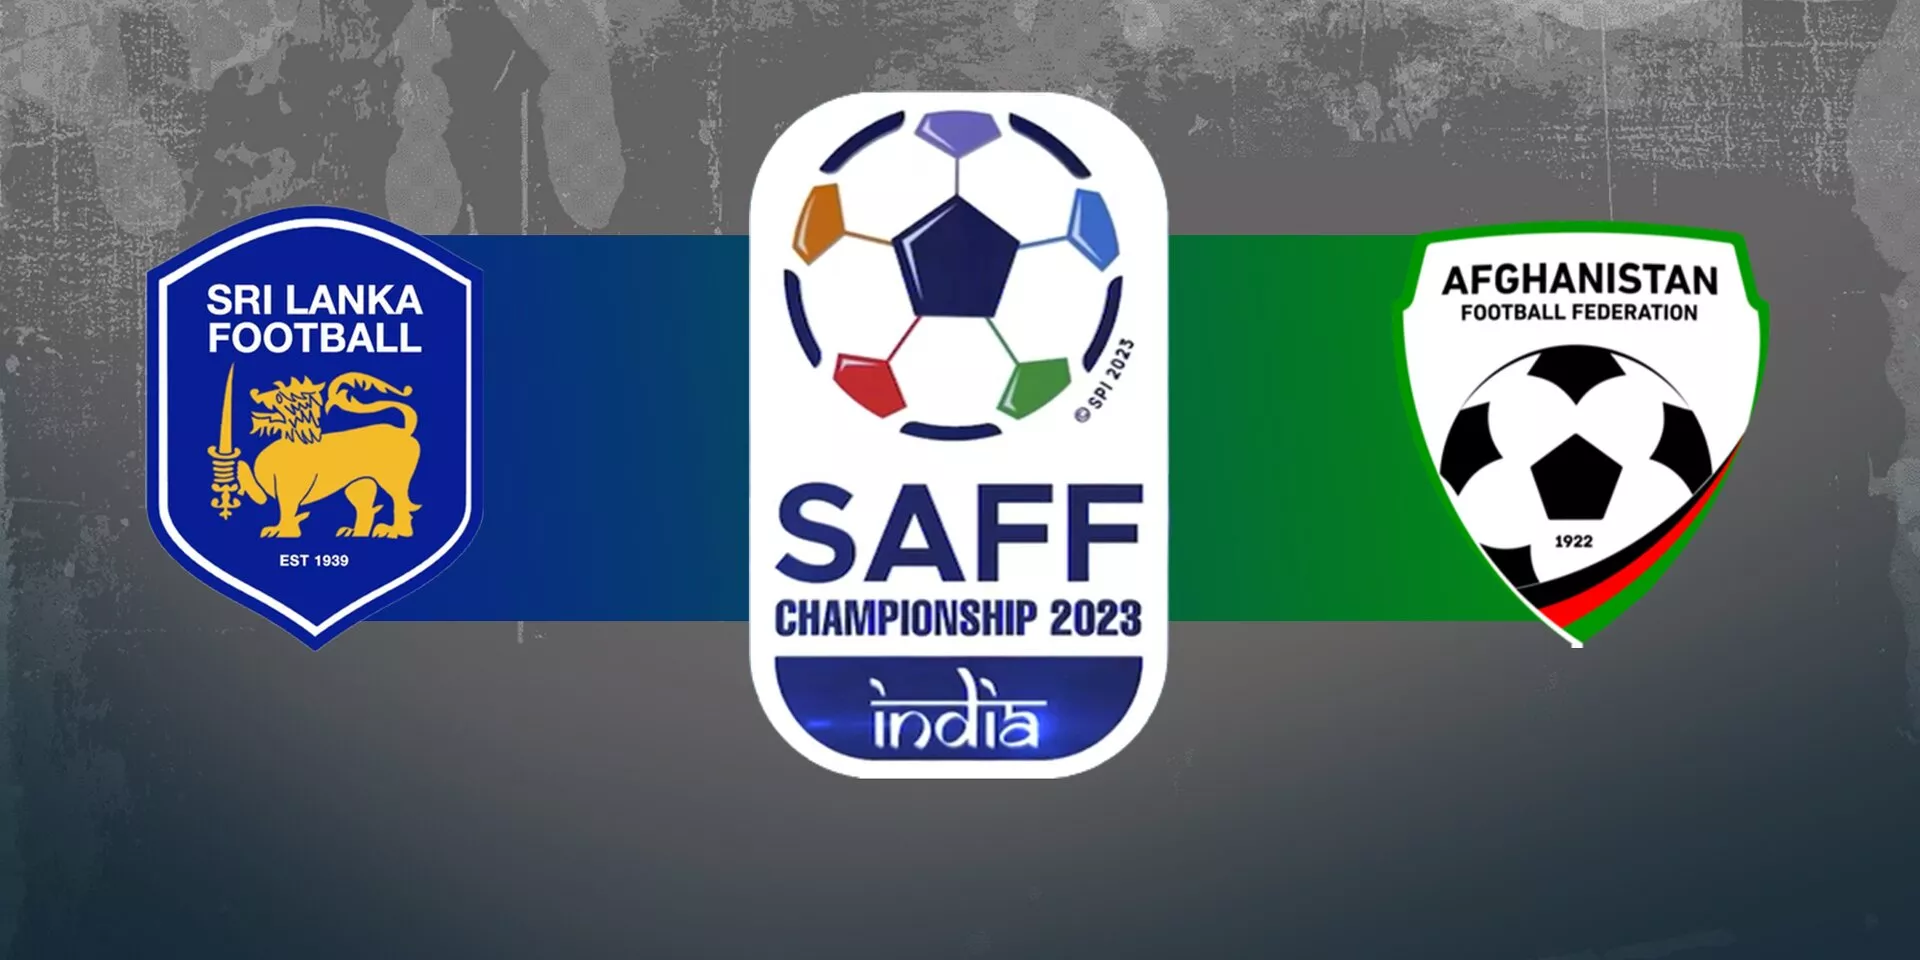 SAFF Championship 2023 Why Afghanistan and Sri Lanka are not participating